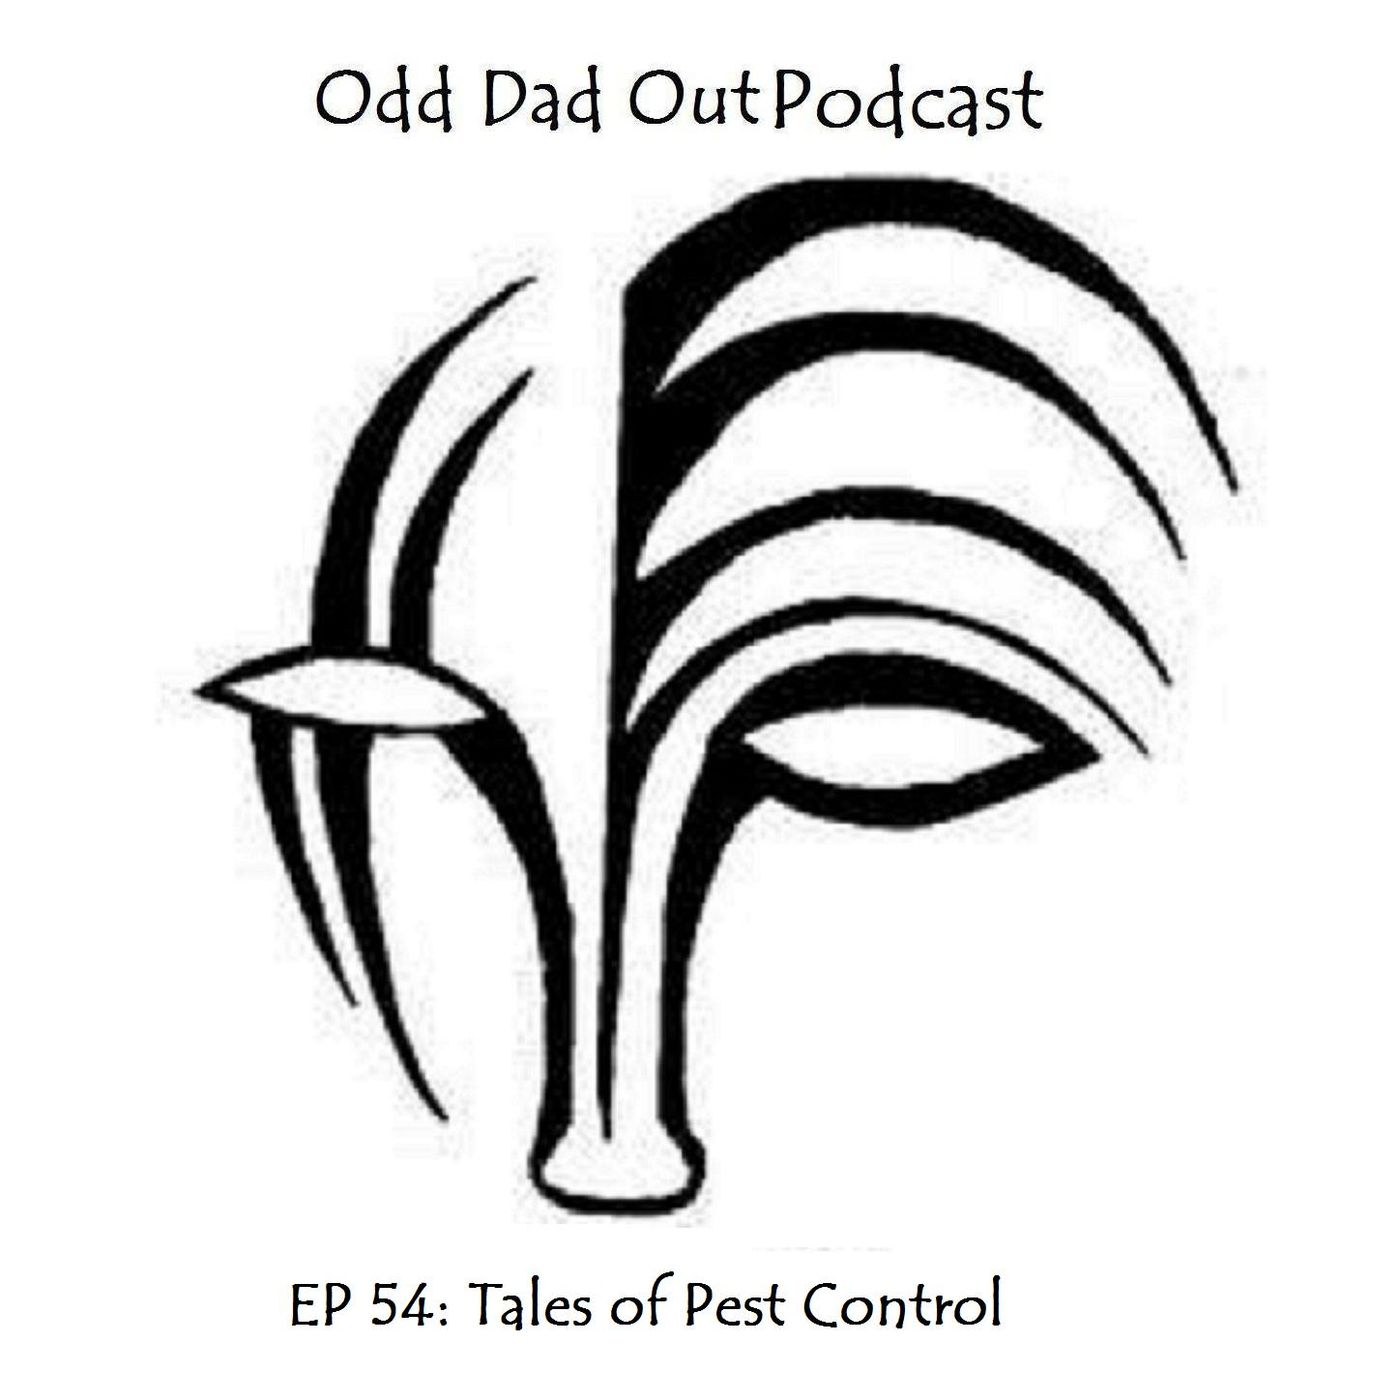 ODO 54: Tales of Pest Control